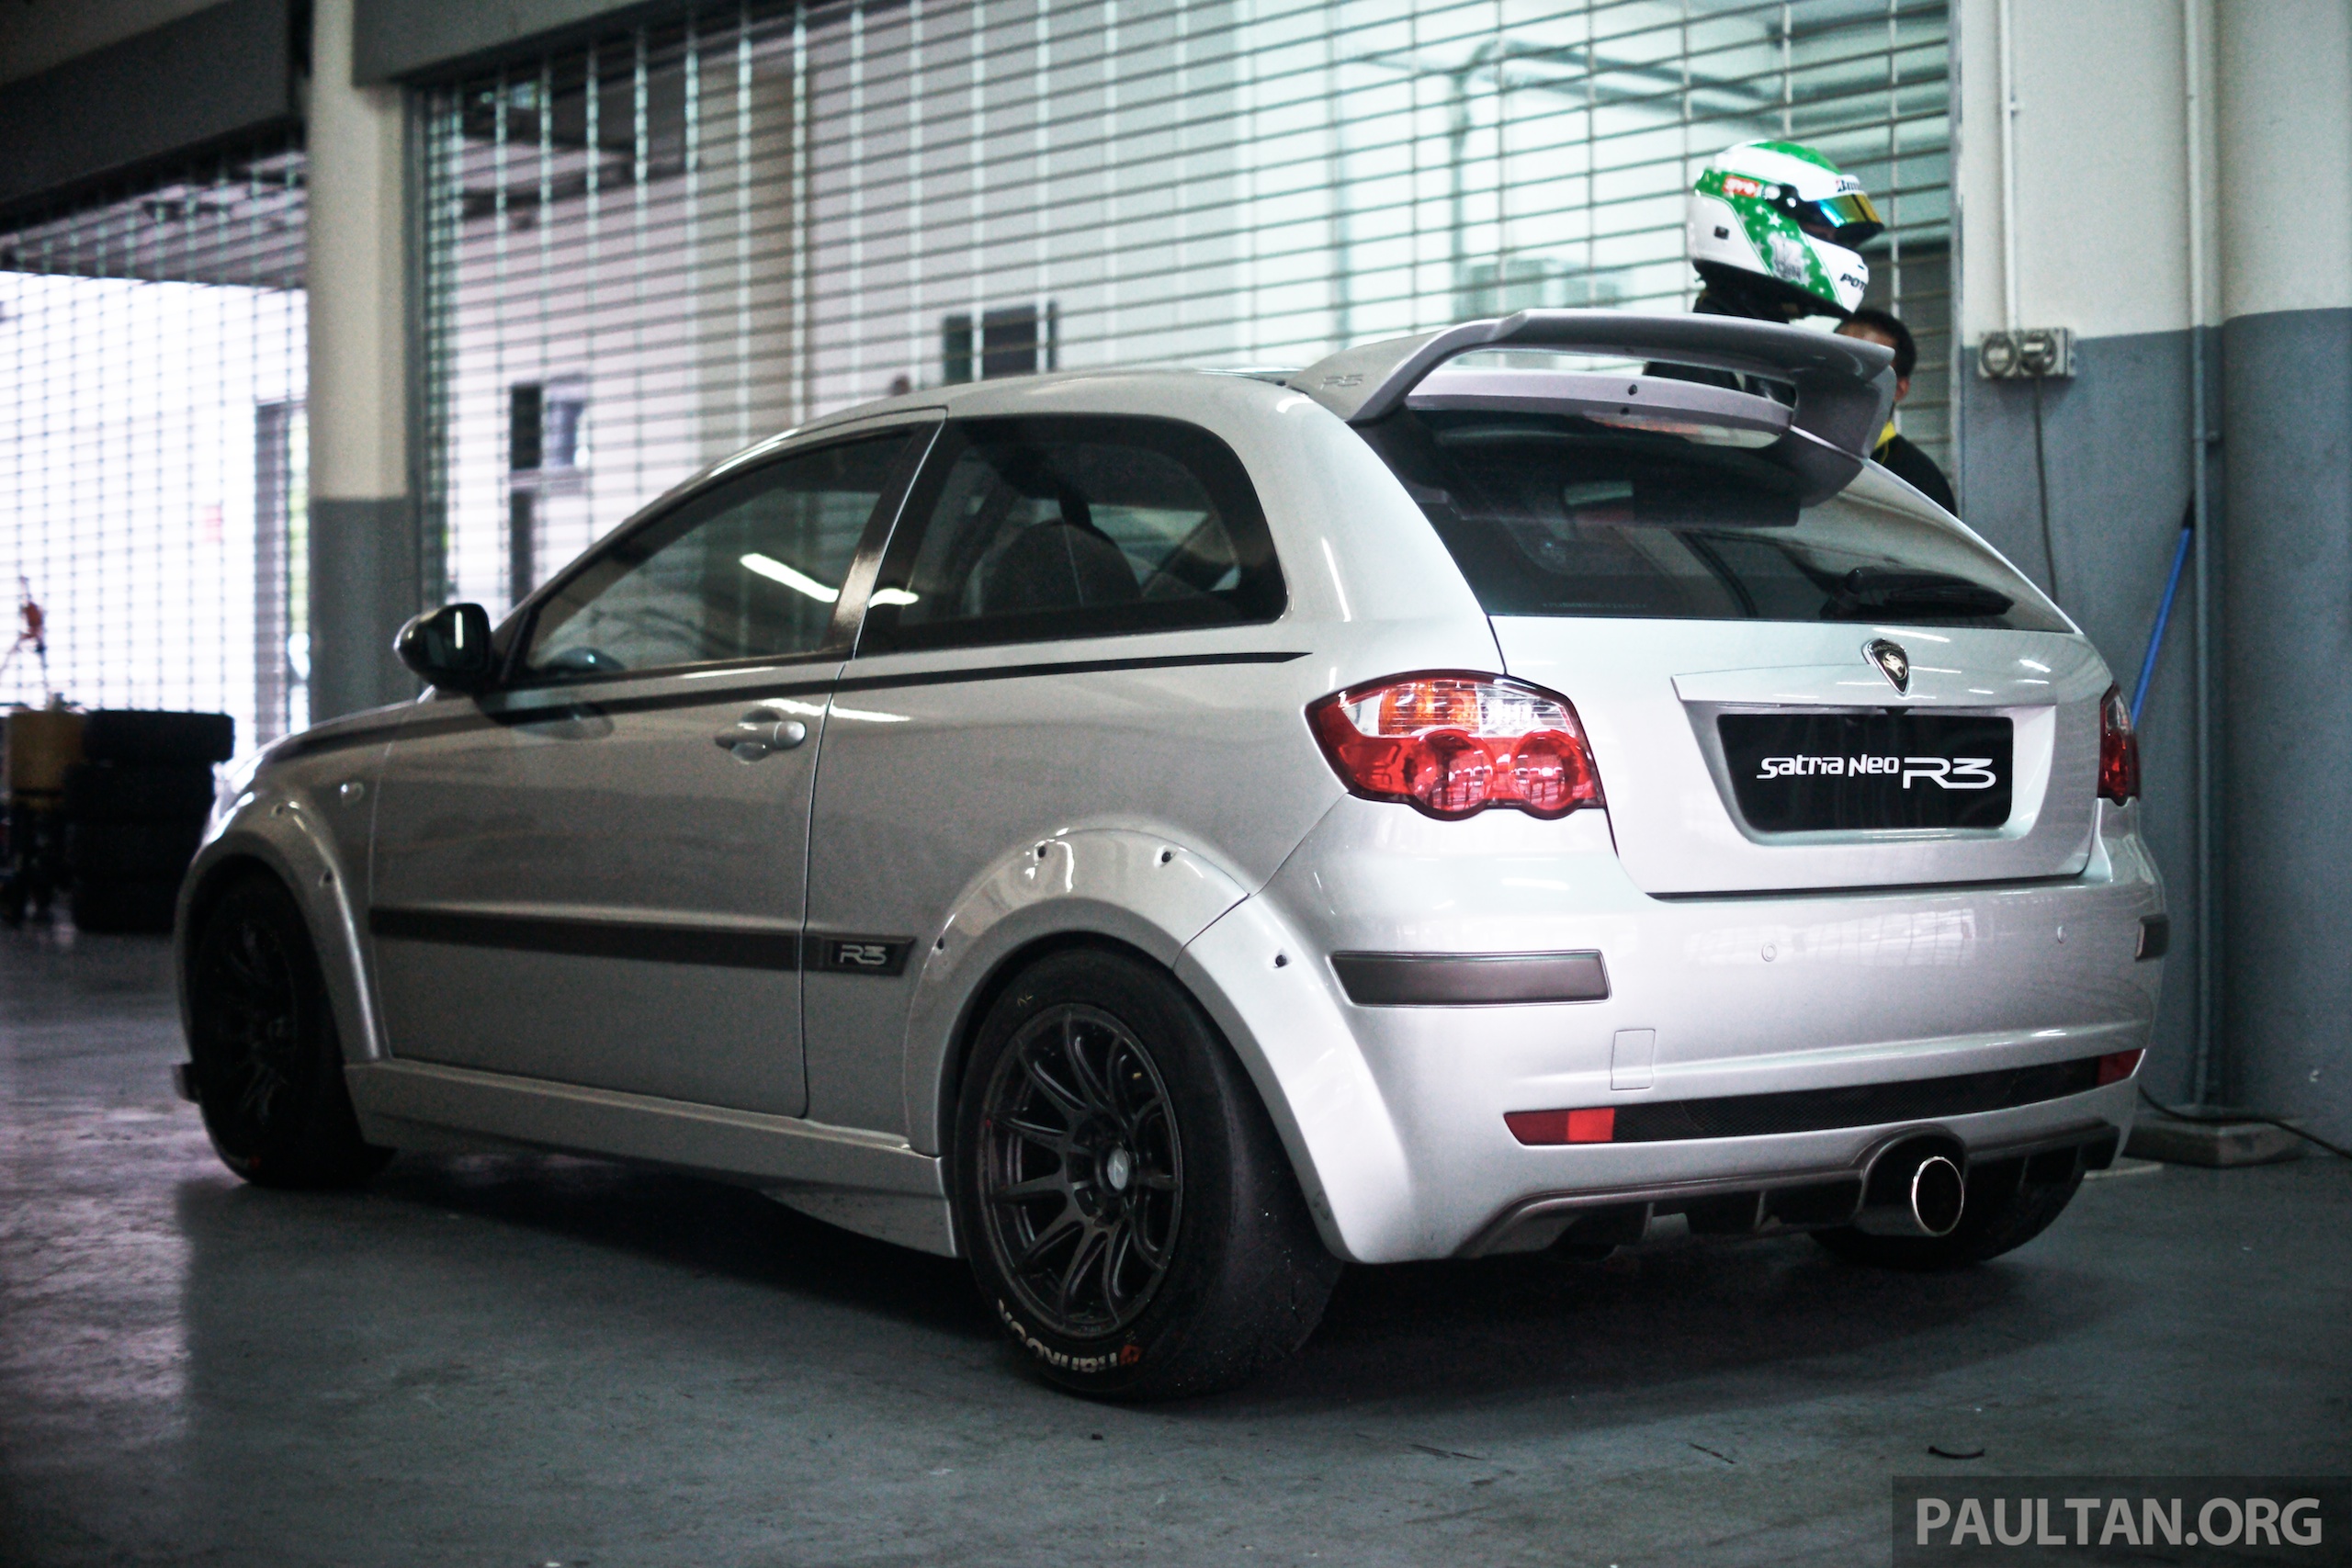 A first taste of Sepang – getting a ride in the Proton R3 Suprima S